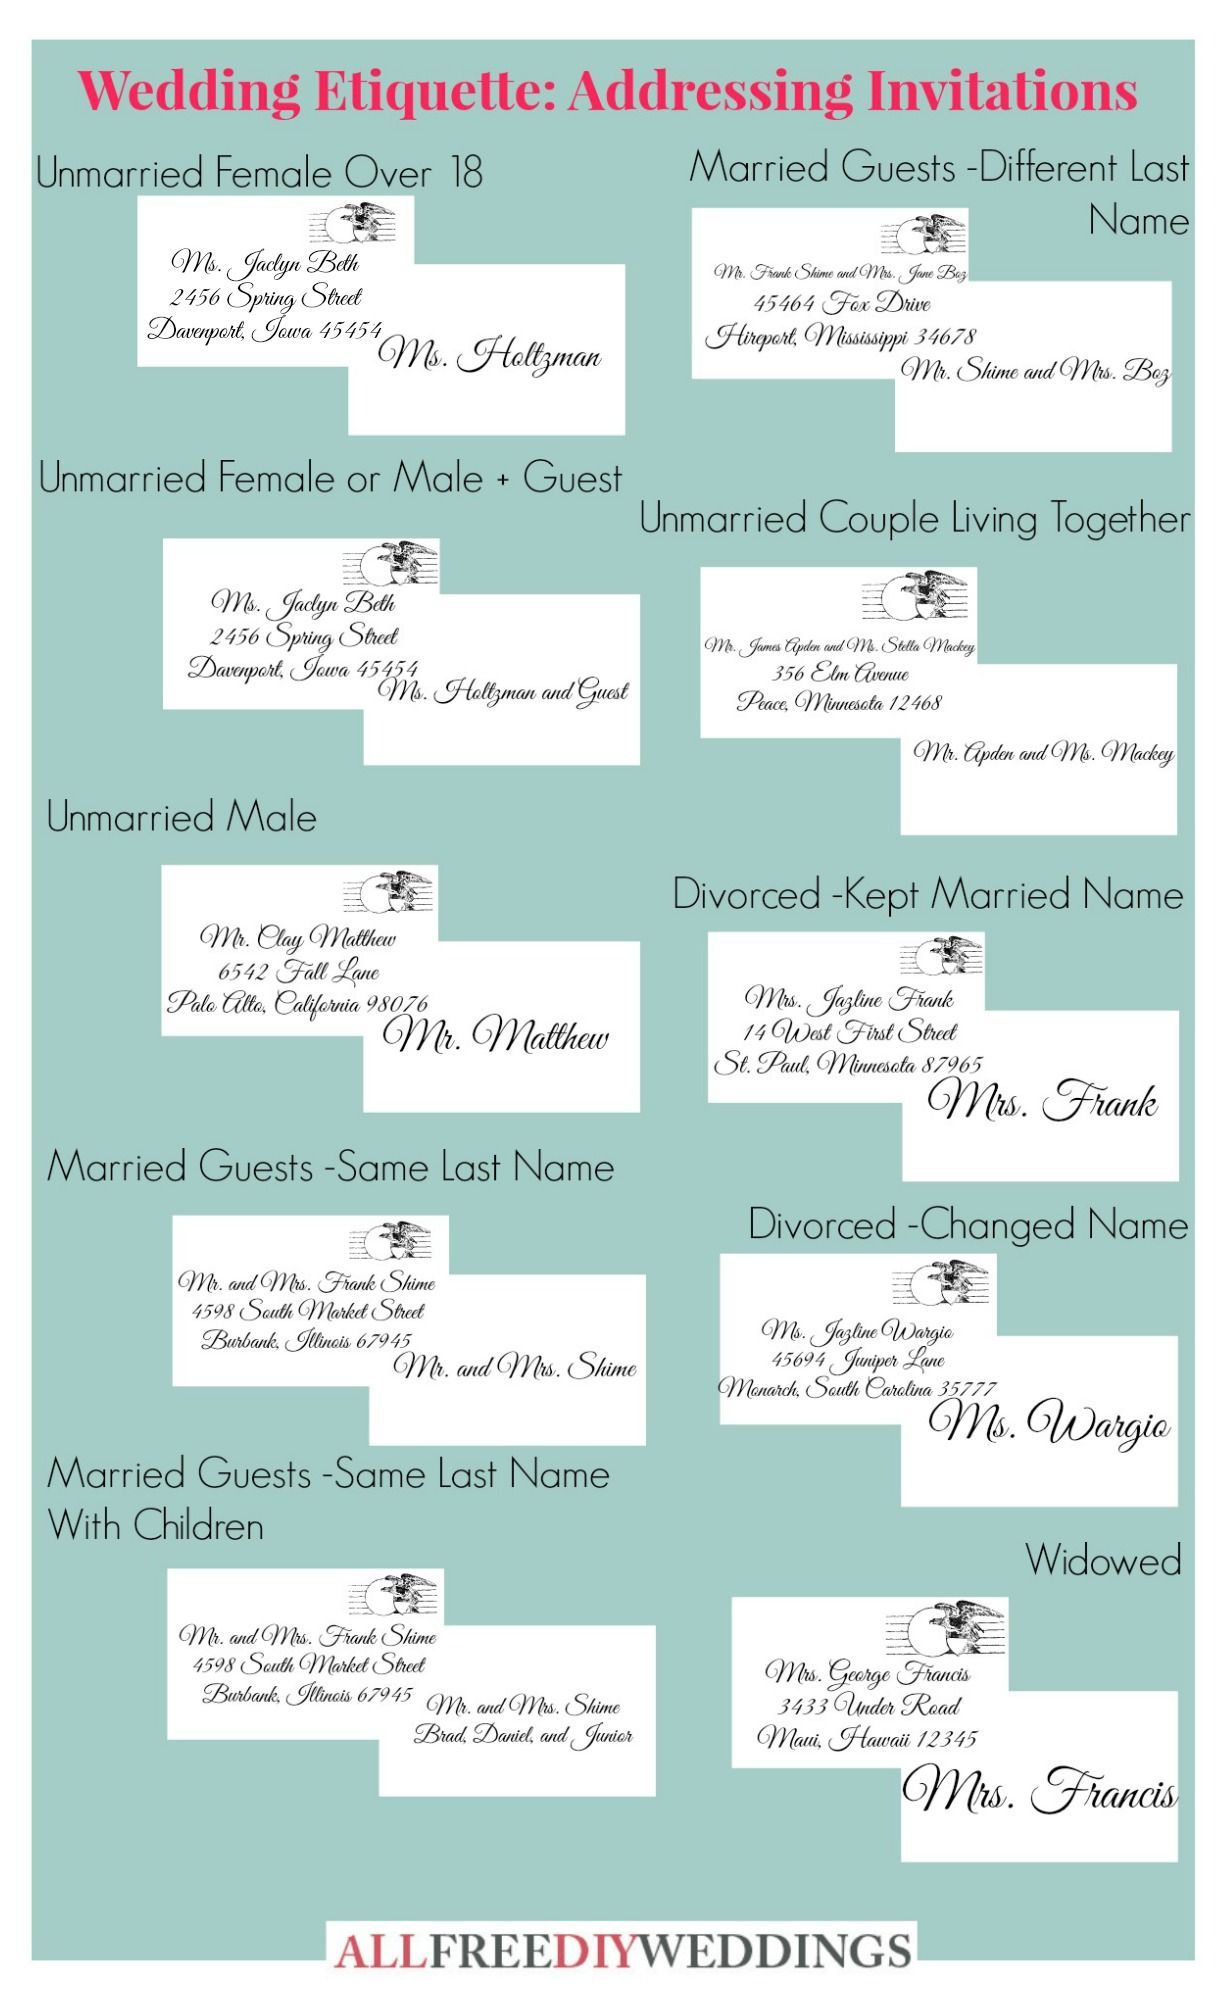 This is a live saver! How to address wedding invitations –all scenarios are